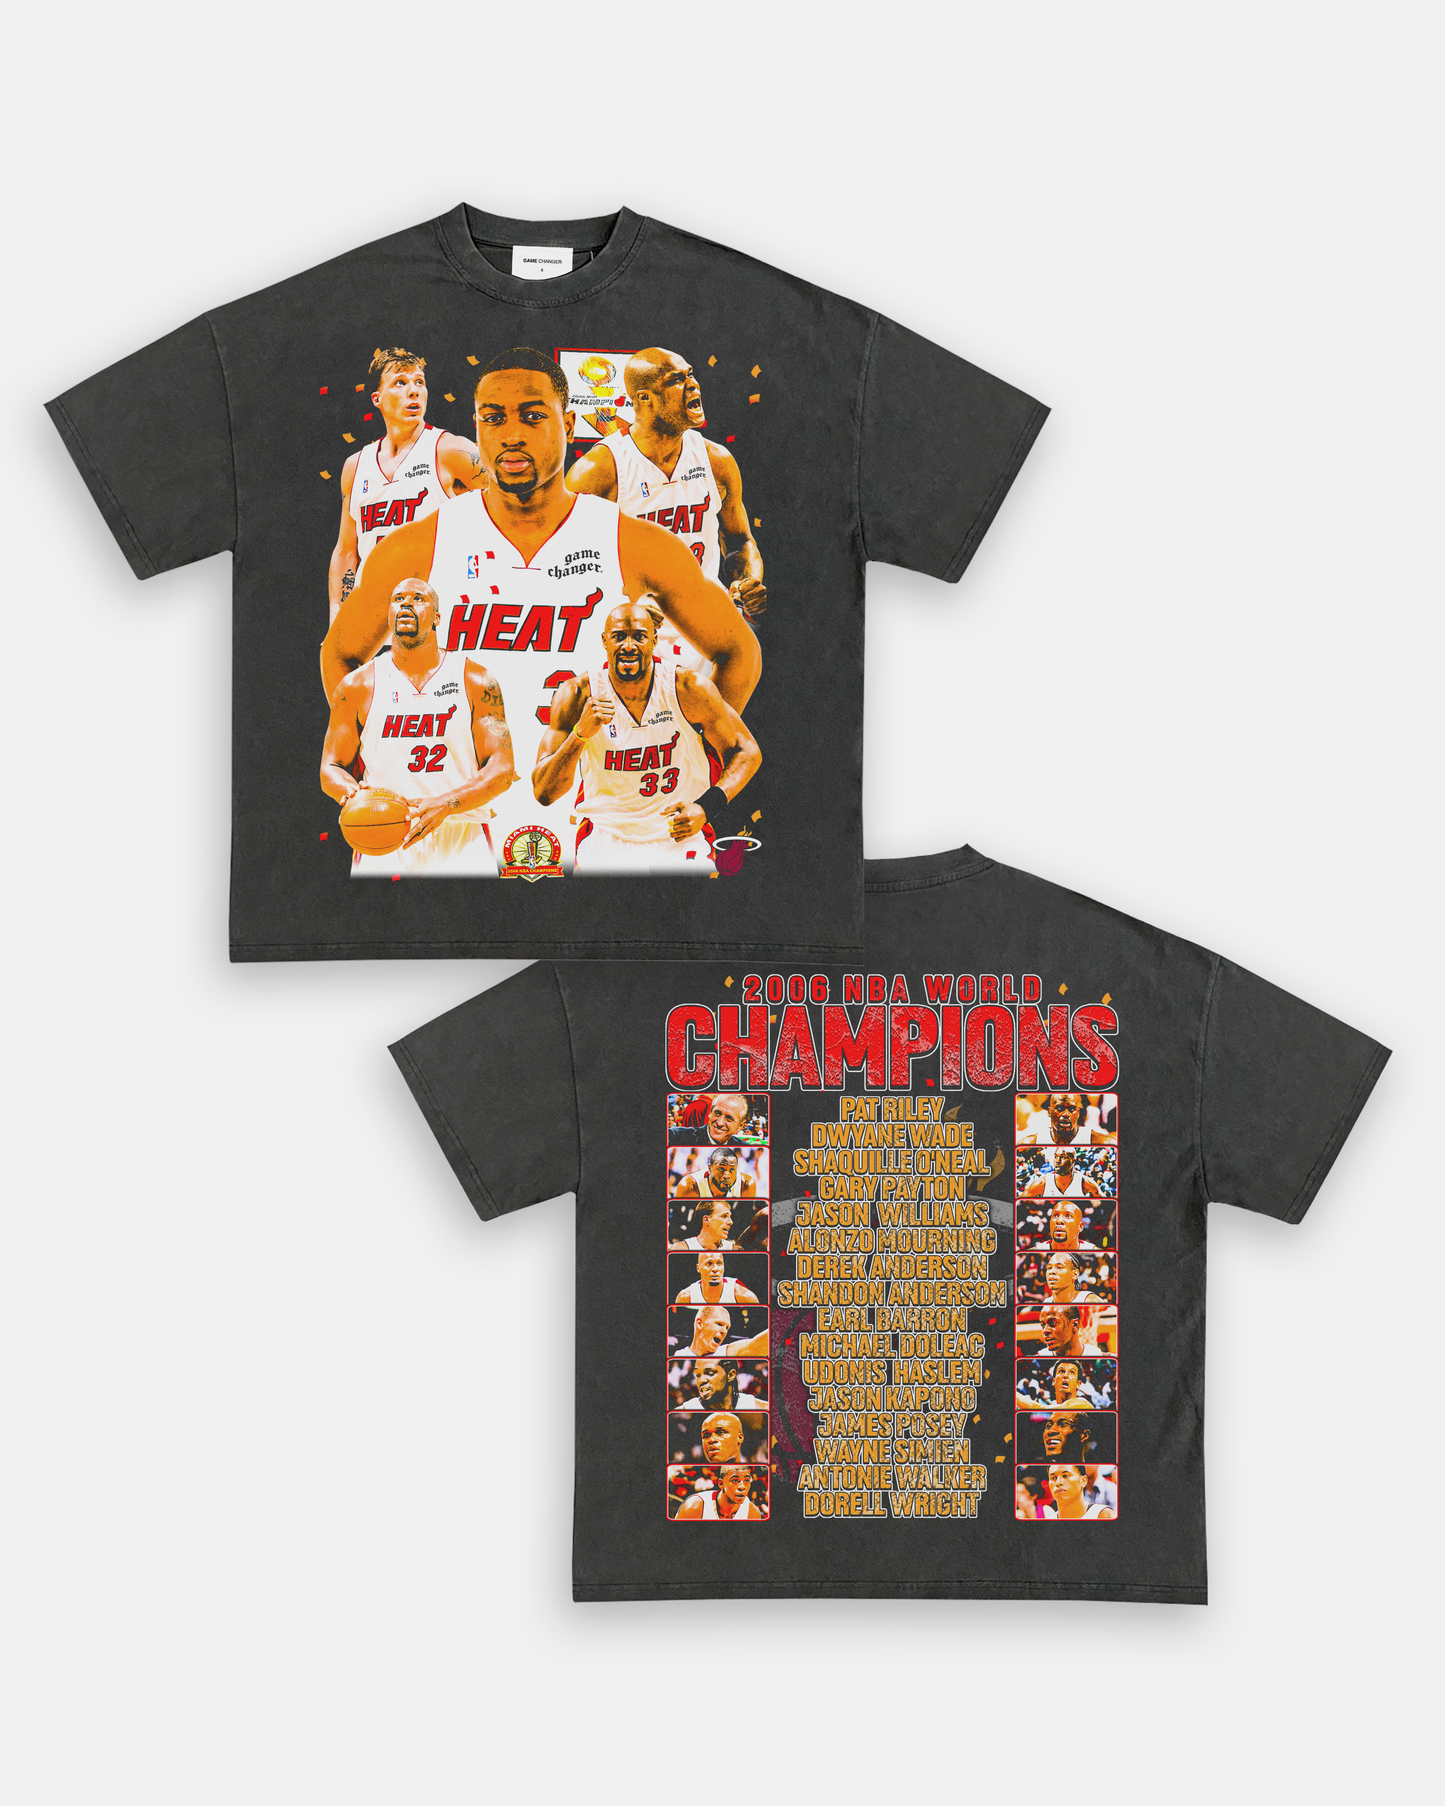 2006 NBA CHAMPS TEE - [DS]